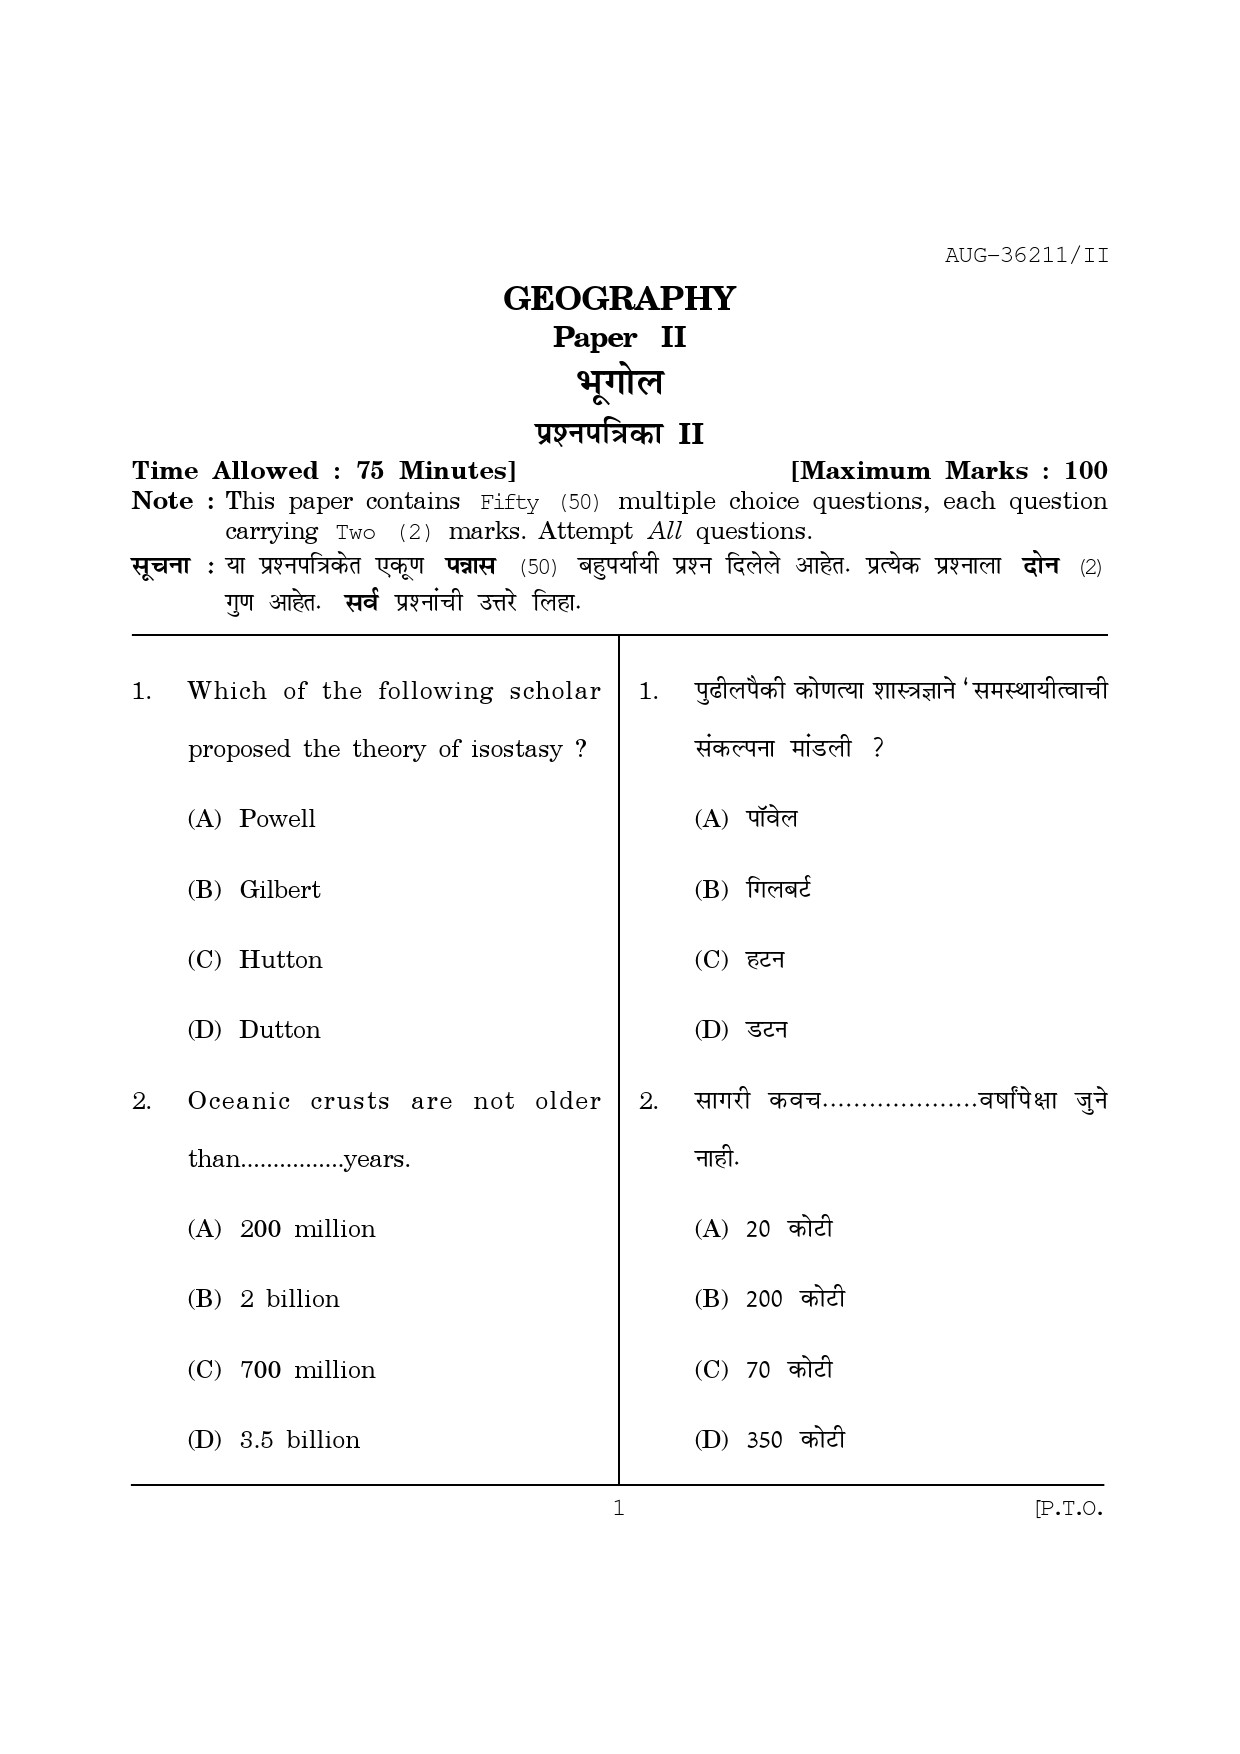 Maharashtra SET Geography Question Paper II August 2011 1